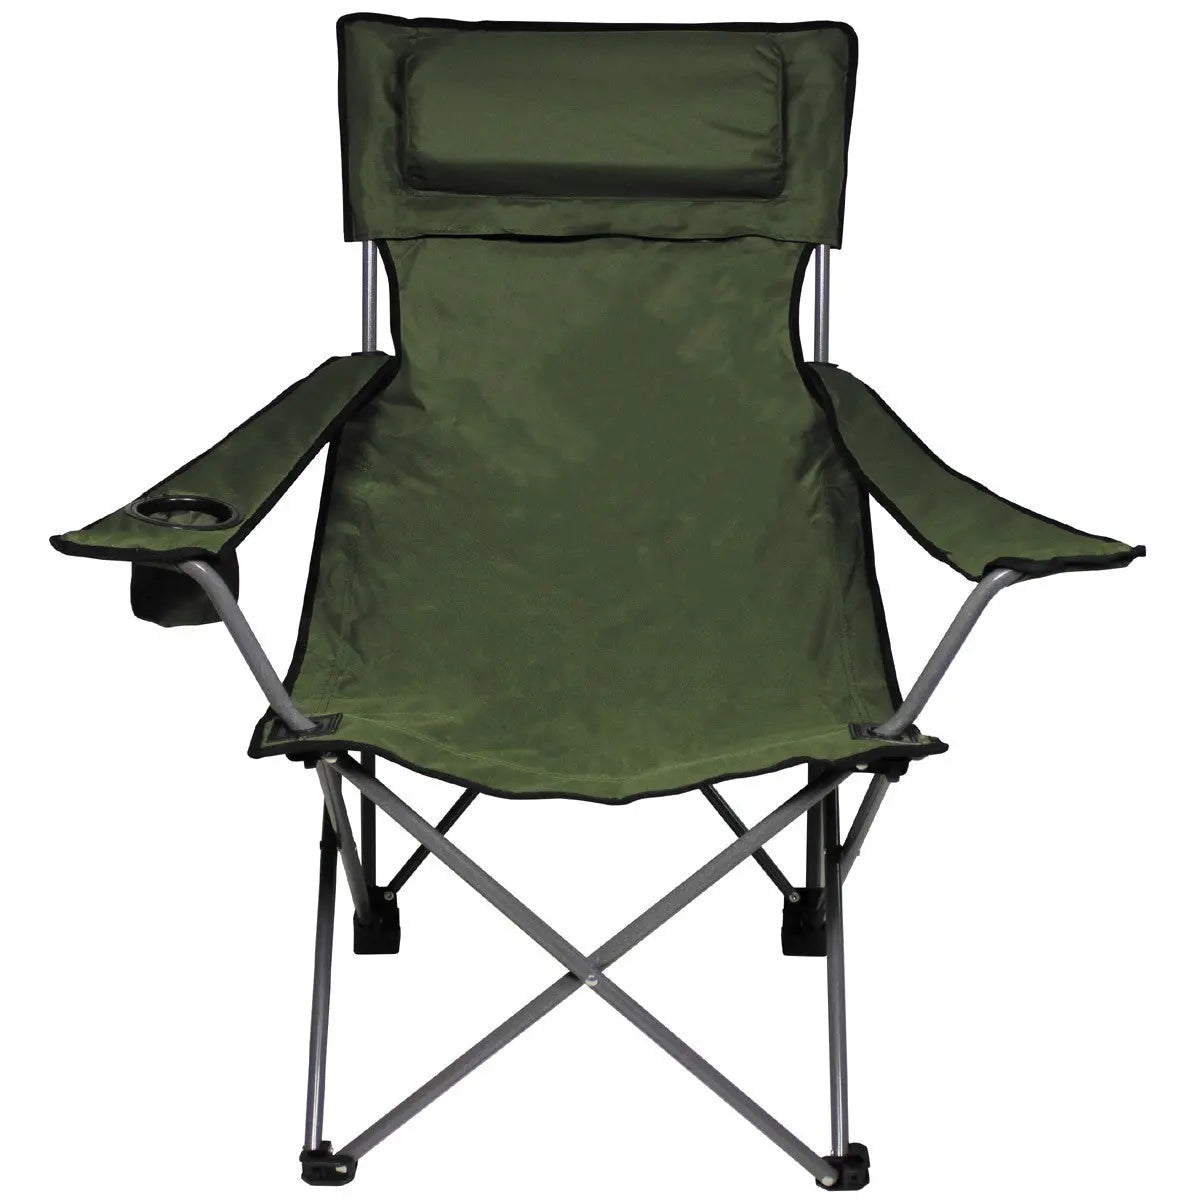 Folding chair, "Deluxe", olive, NSO Gear Folding chair